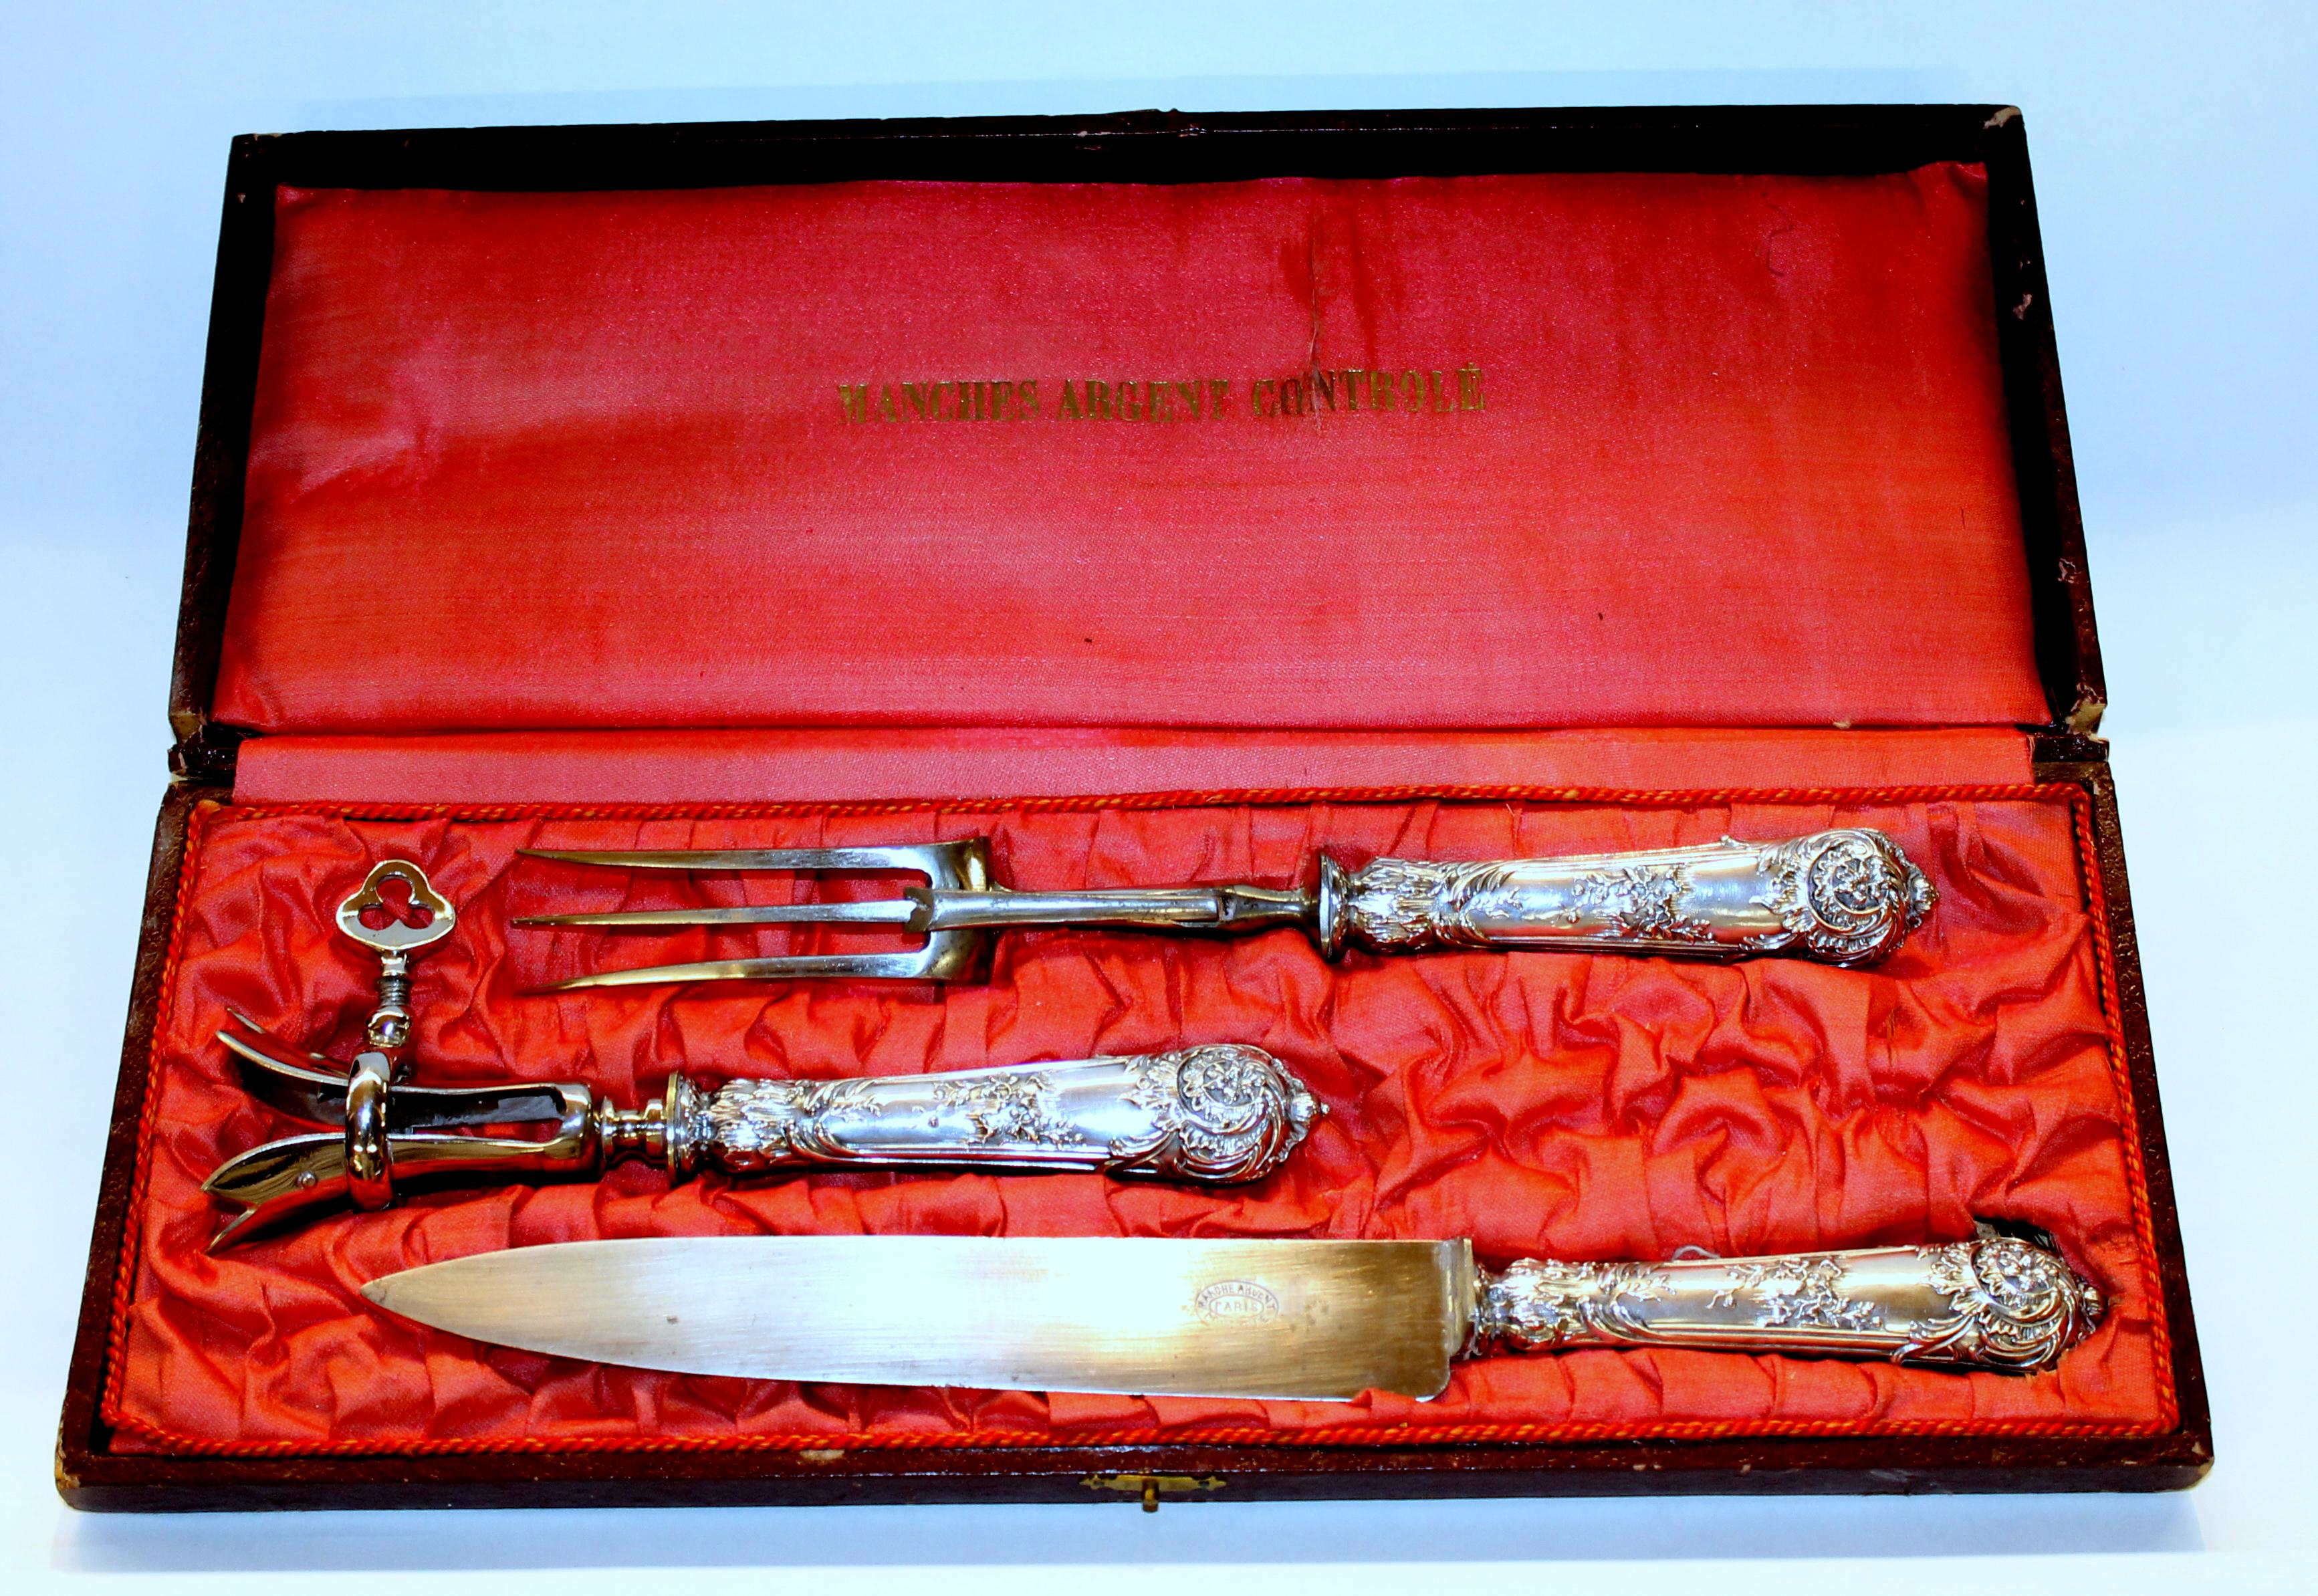 Fabulous antique French .950 fine silver handled Rococo style three-piece carving set with Gigot (bone holder)

Maker's Marks: Manches Argent Controle
-Paris- and the 